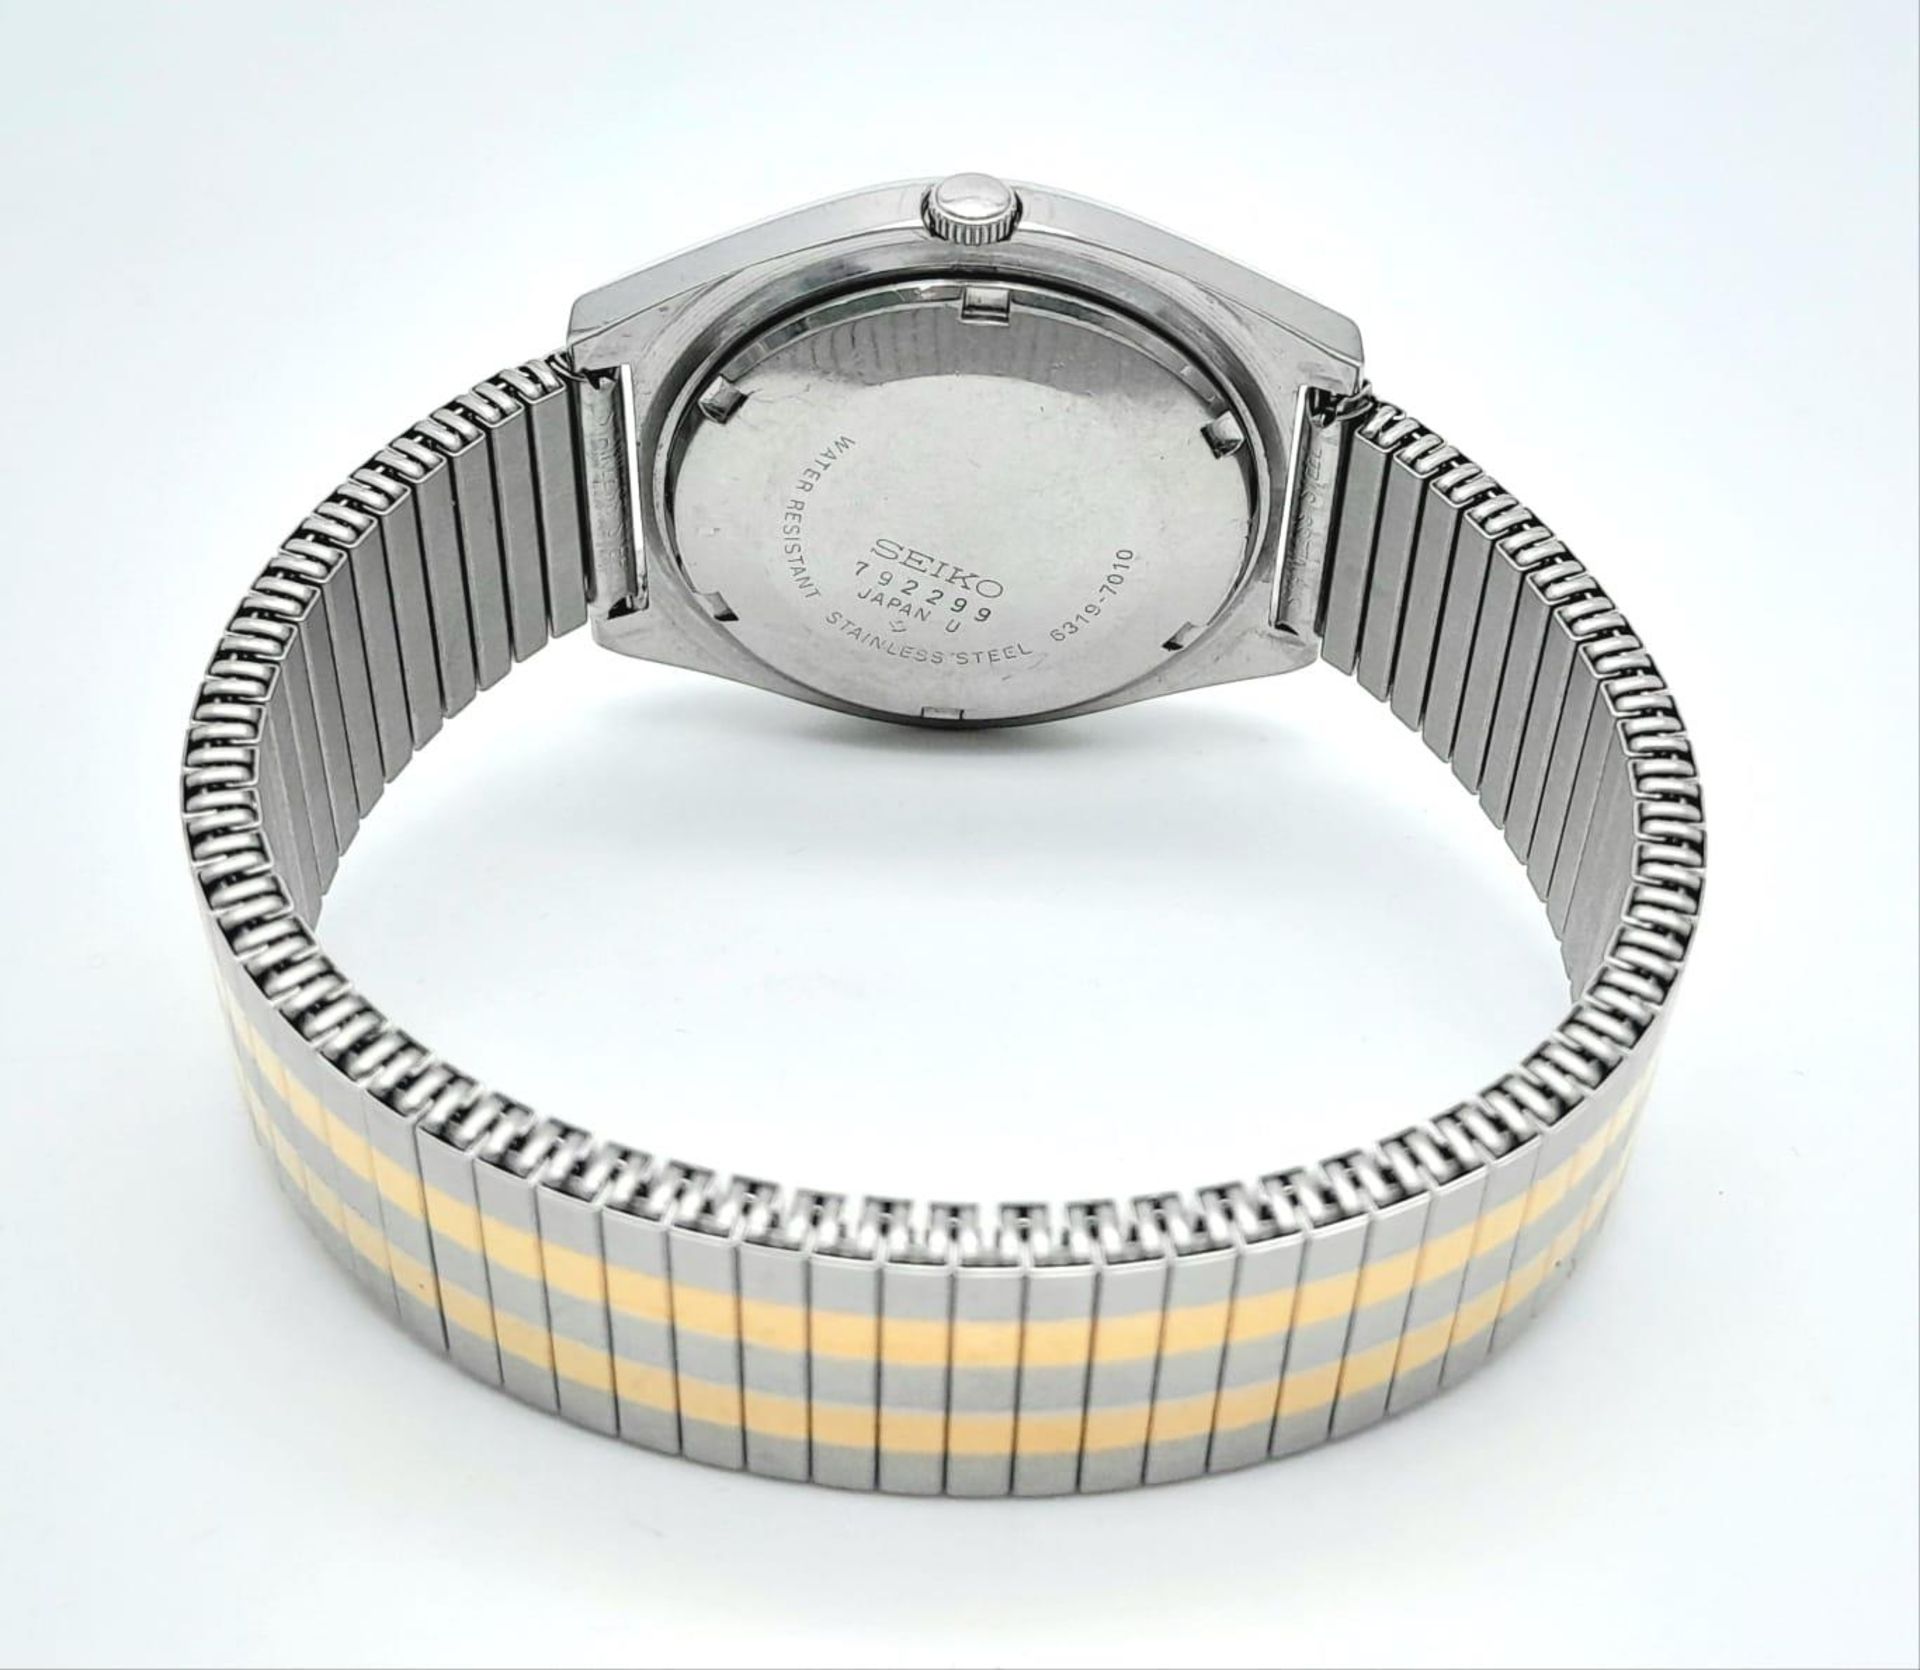 A Vintage Seiko 5 Automatic Gents Watch. Two tone stainless steel bracelet and case - 37mm. Metallic - Image 4 of 5